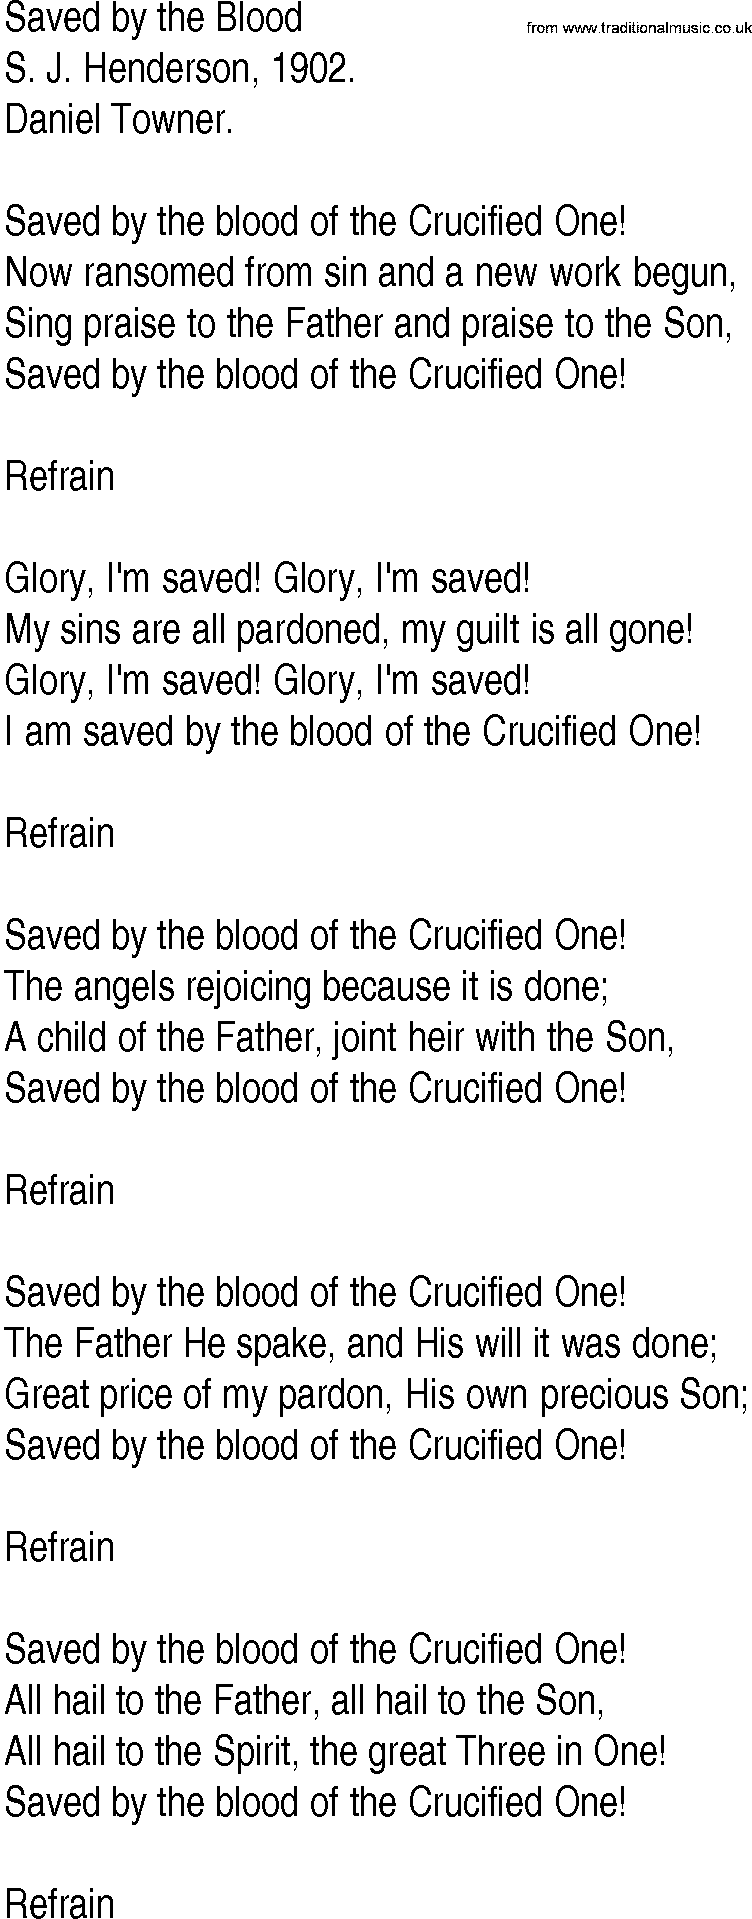 Hymn and Gospel Song: Saved by the Blood by S J Henderson lyrics